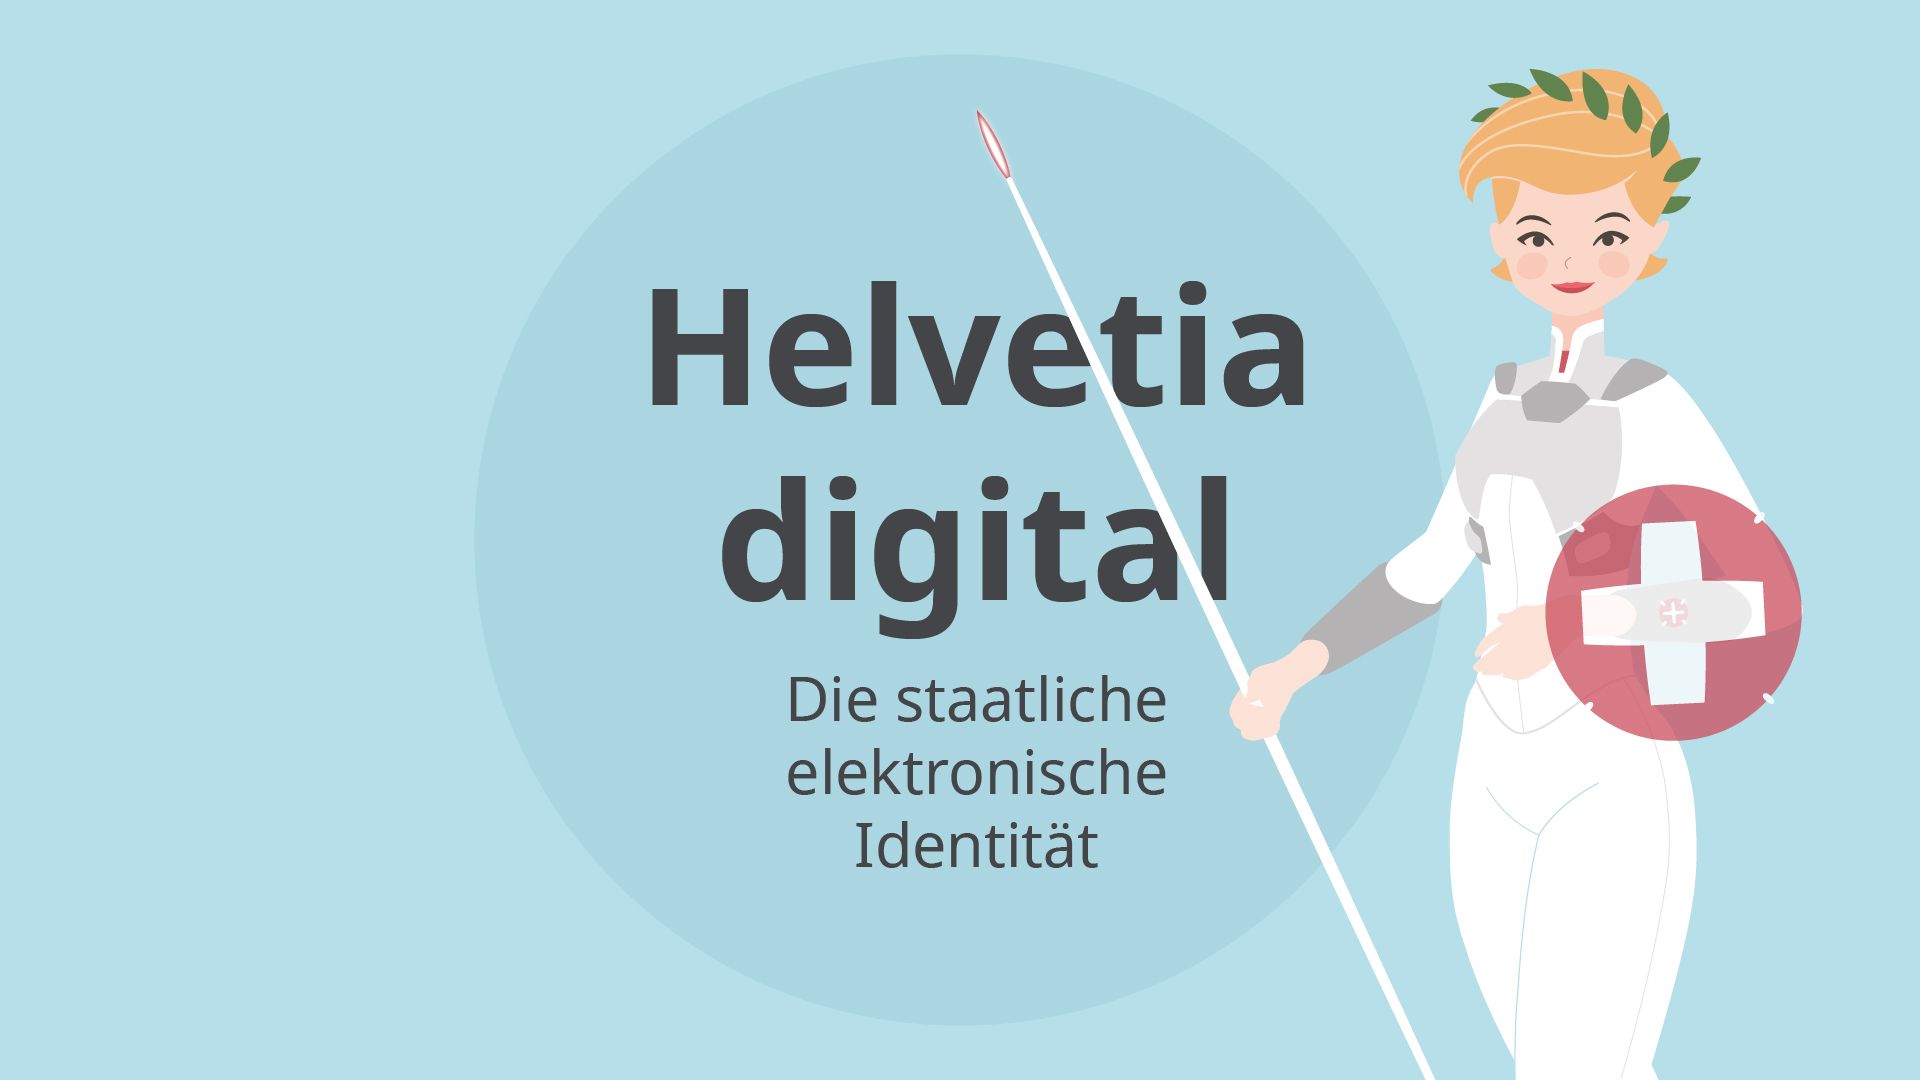 Video title scene - "Helvetia digital - The state electronic identity".